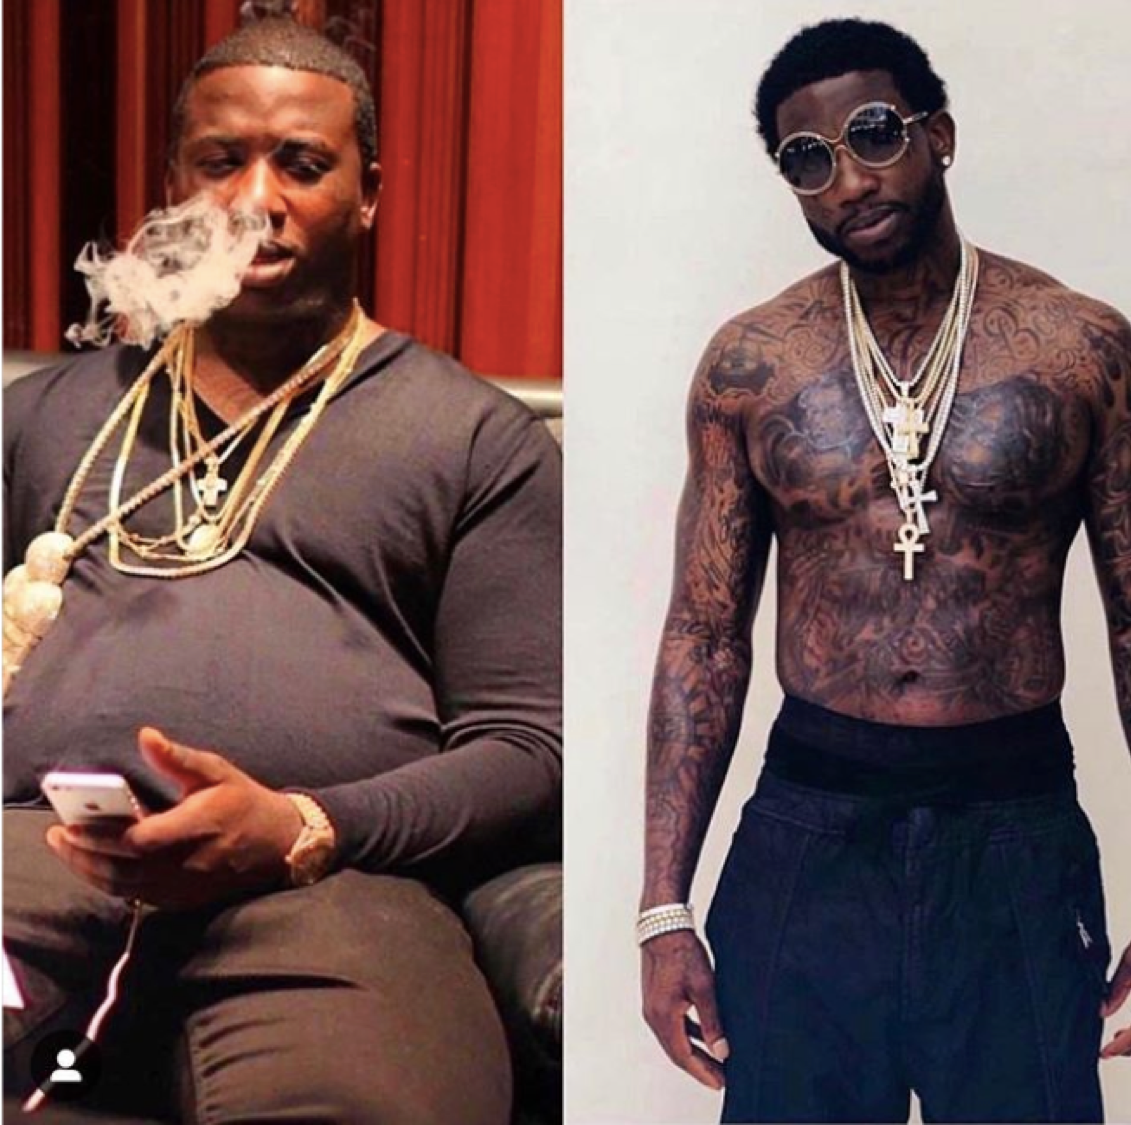 The Transformation of Gucci Mane: “I shook off my demons now I'm back to  myself”  - Where Wellness & Culture Connect